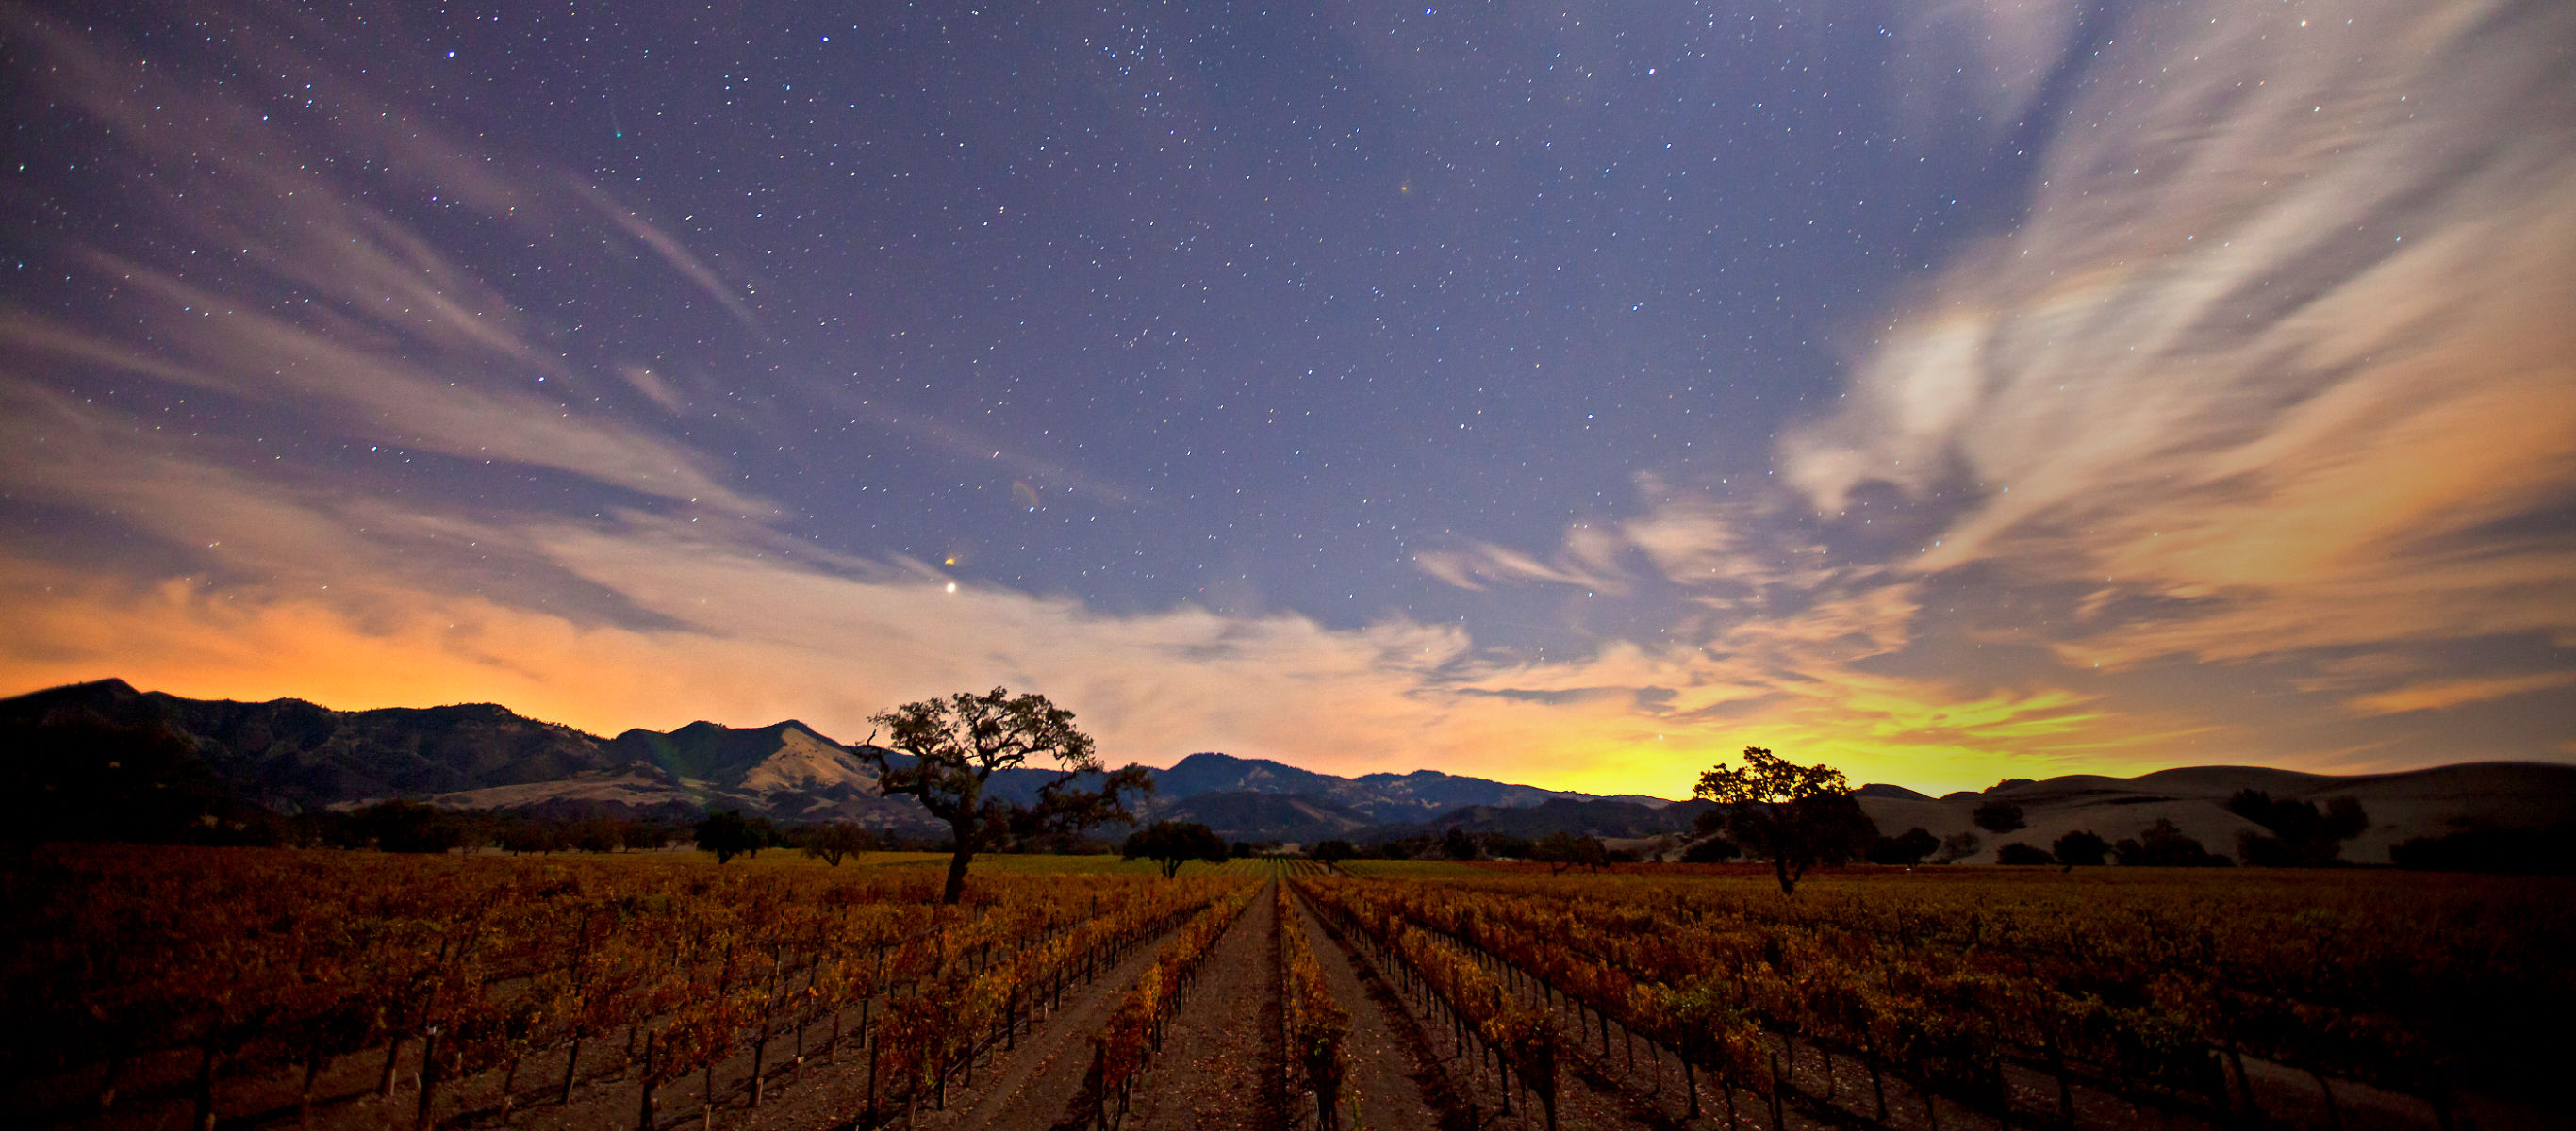 Rodney's Vineyard, located at the Fess Parker home ranch, at sunset.